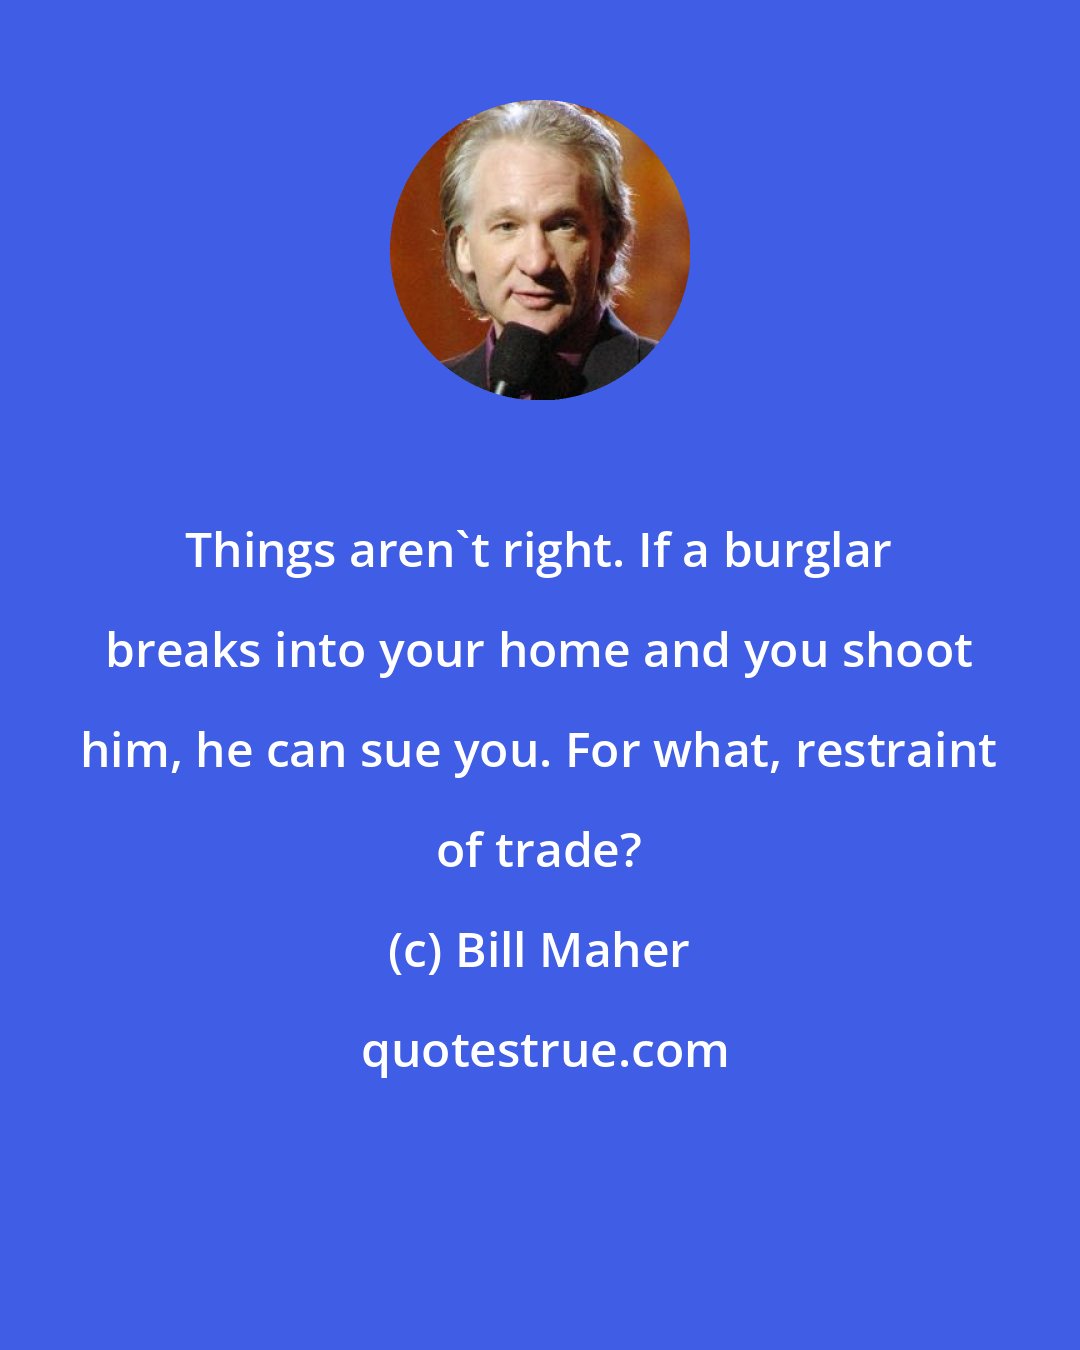 Bill Maher: Things aren't right. If a burglar breaks into your home and you shoot him, he can sue you. For what, restraint of trade?